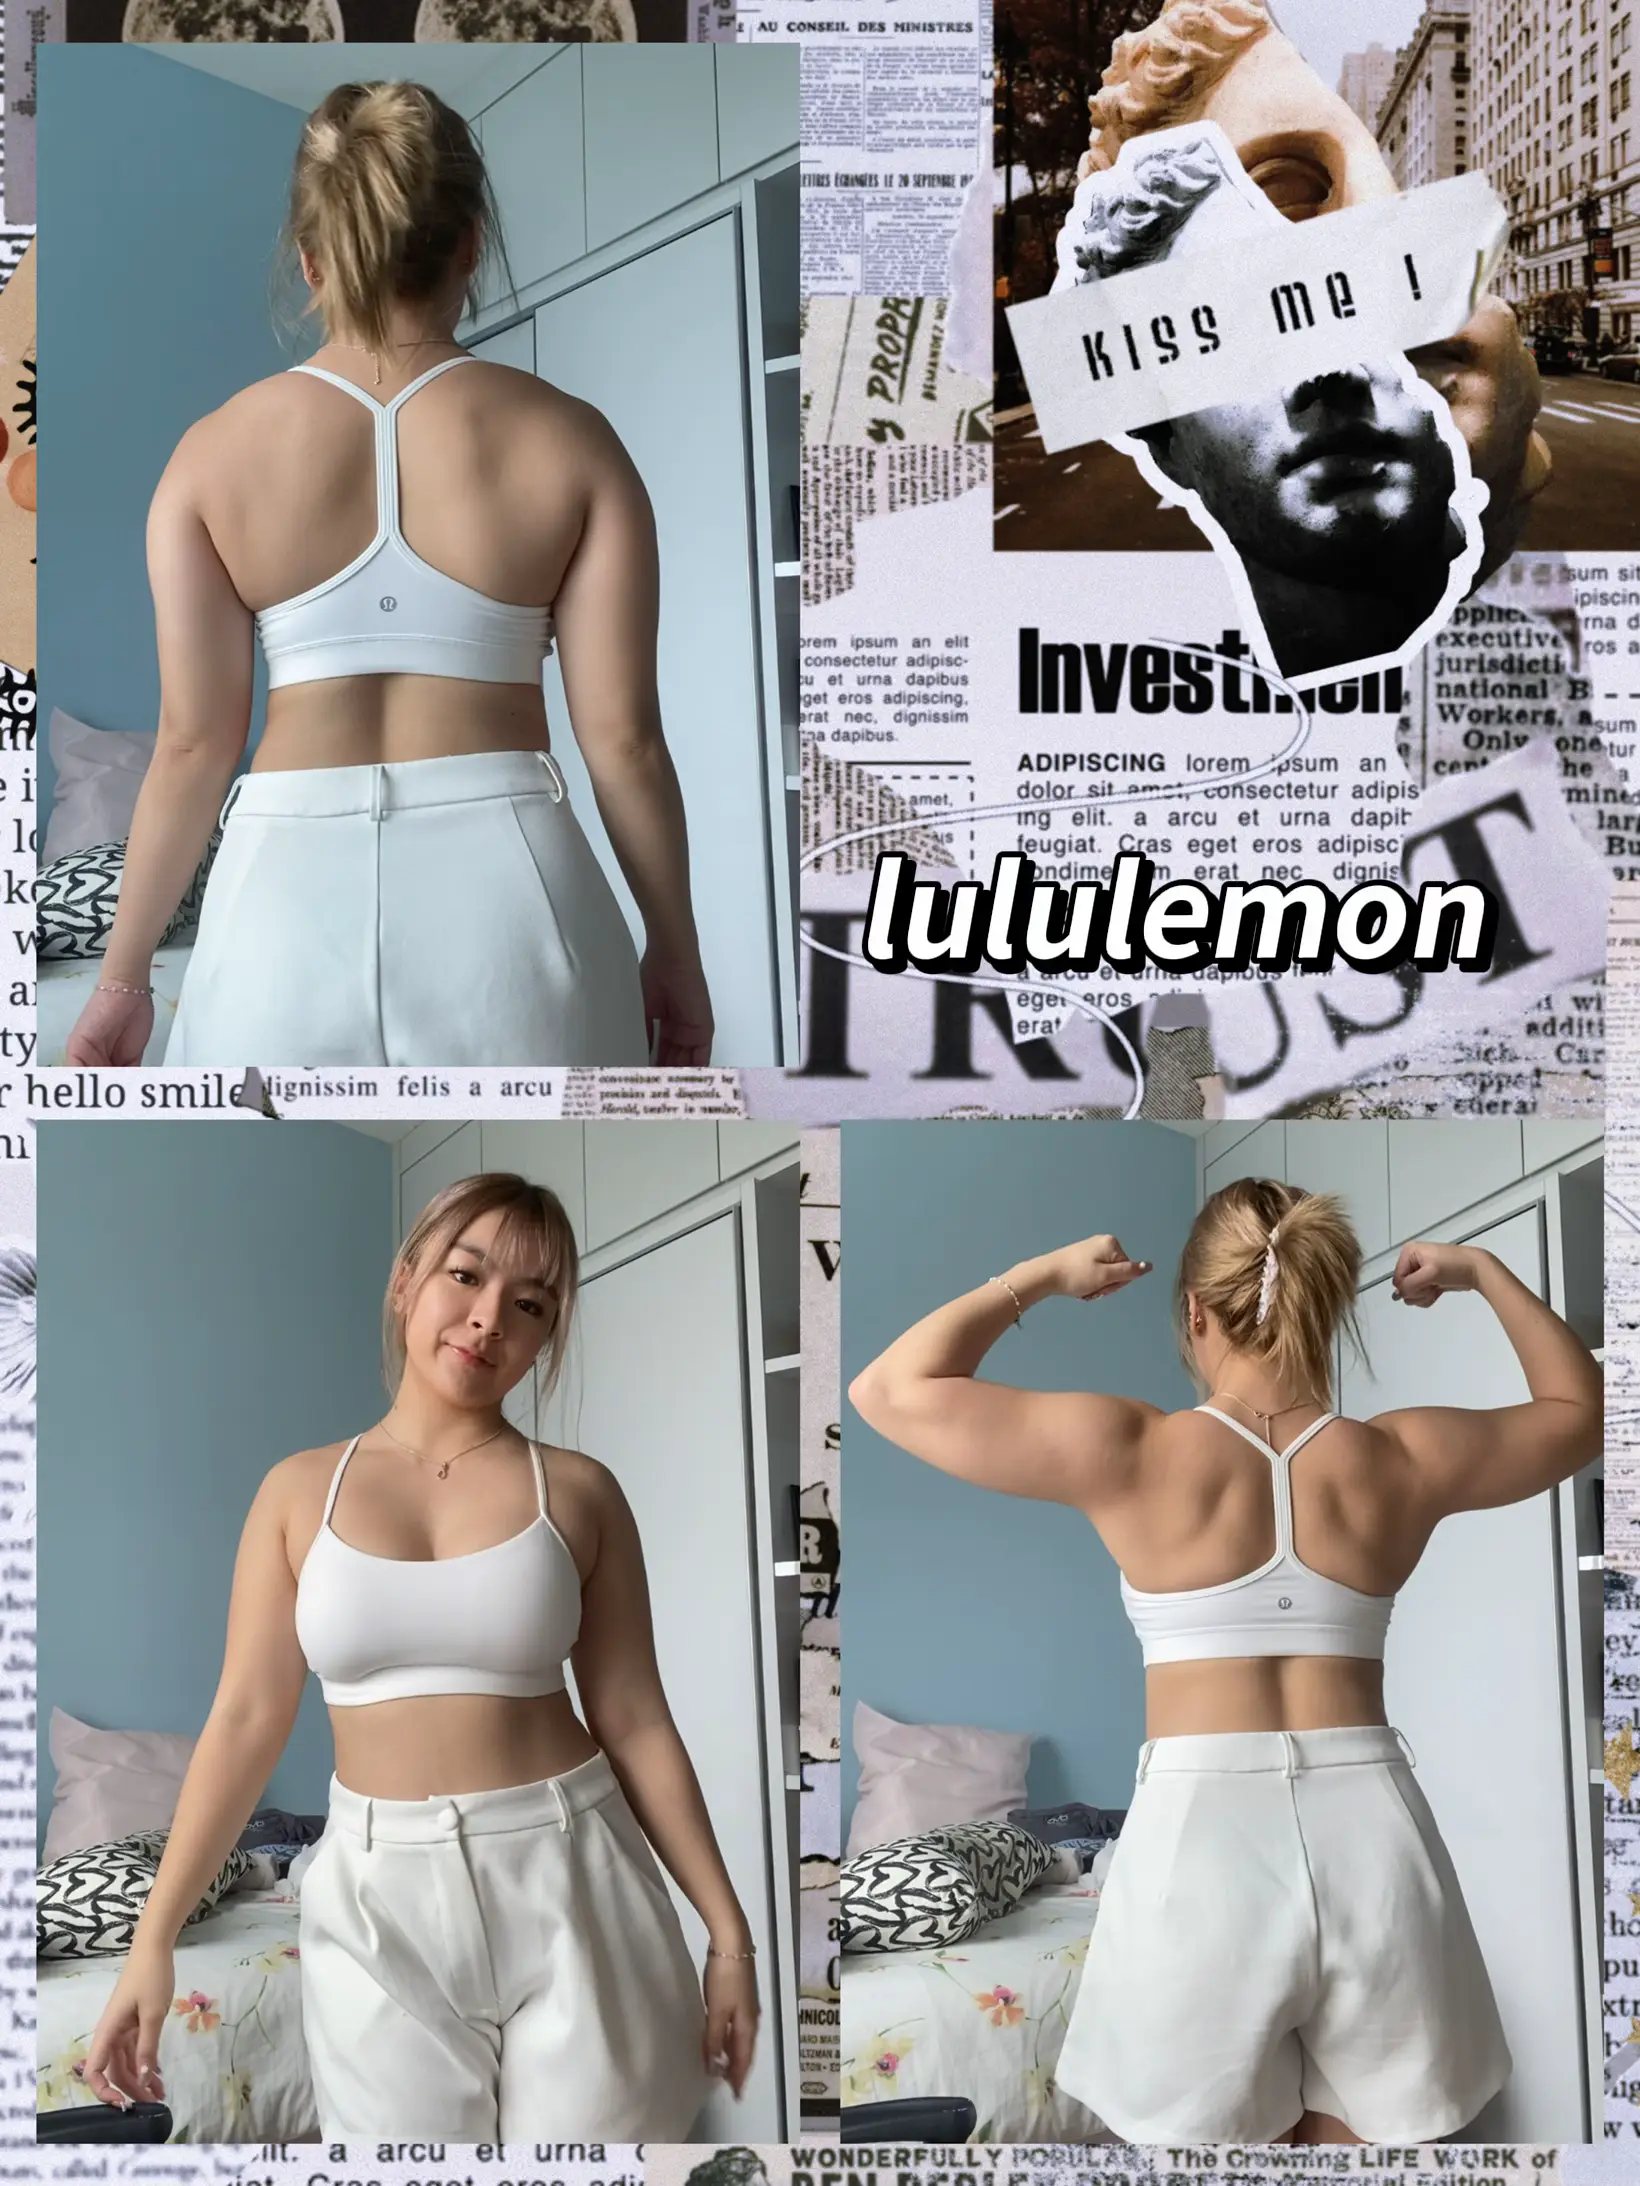 a better & cheaper dupe for the lululemon Y bra 👀🤍